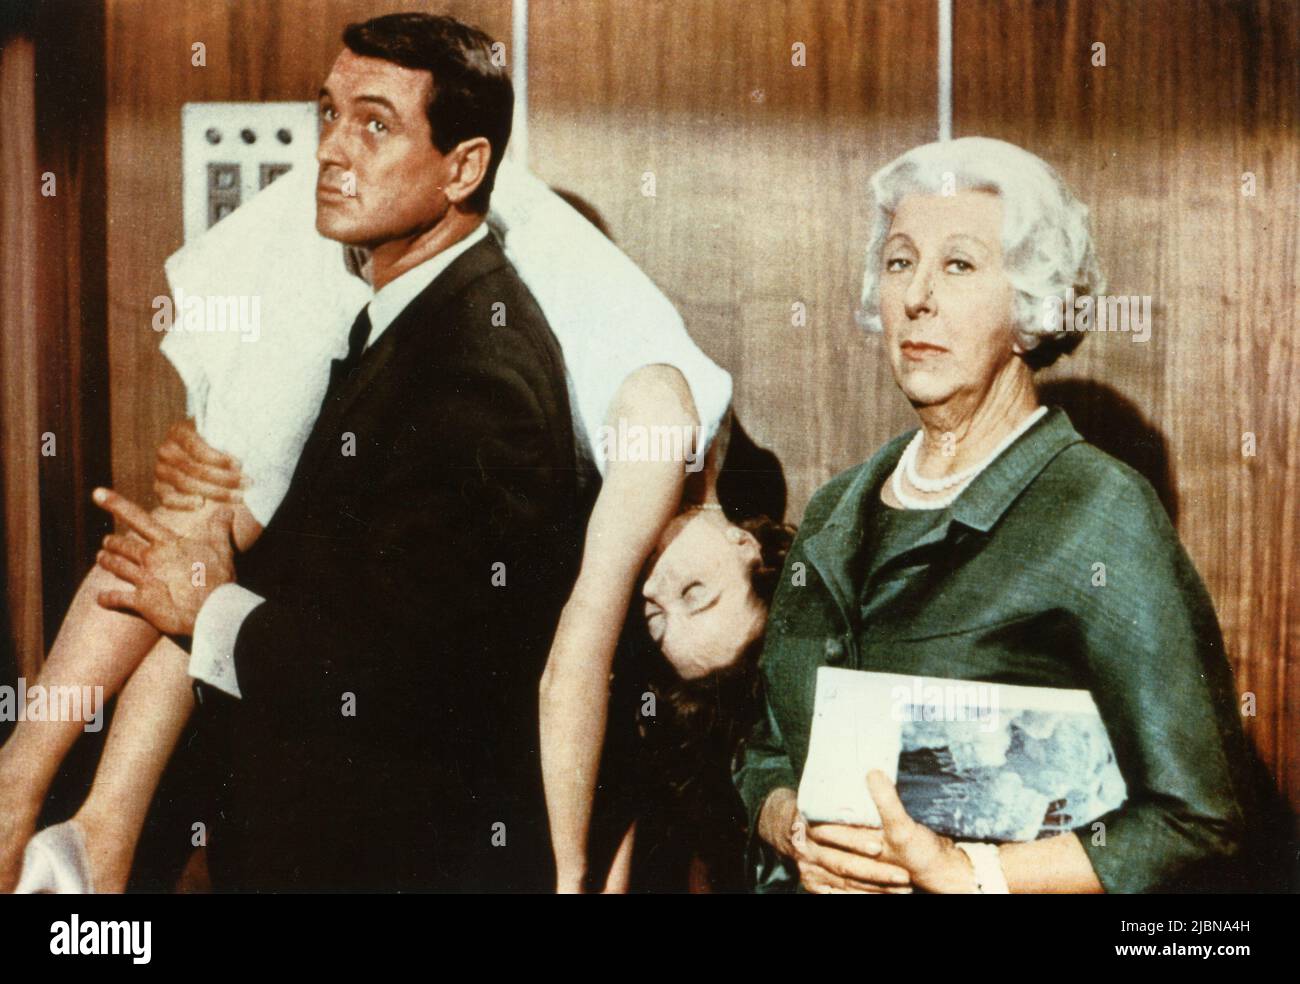 American actor Rock Hudson, and actresses Leslie Caron and Norma Varden in the movie A Very Special Favor, USA 1965 Stock Photo